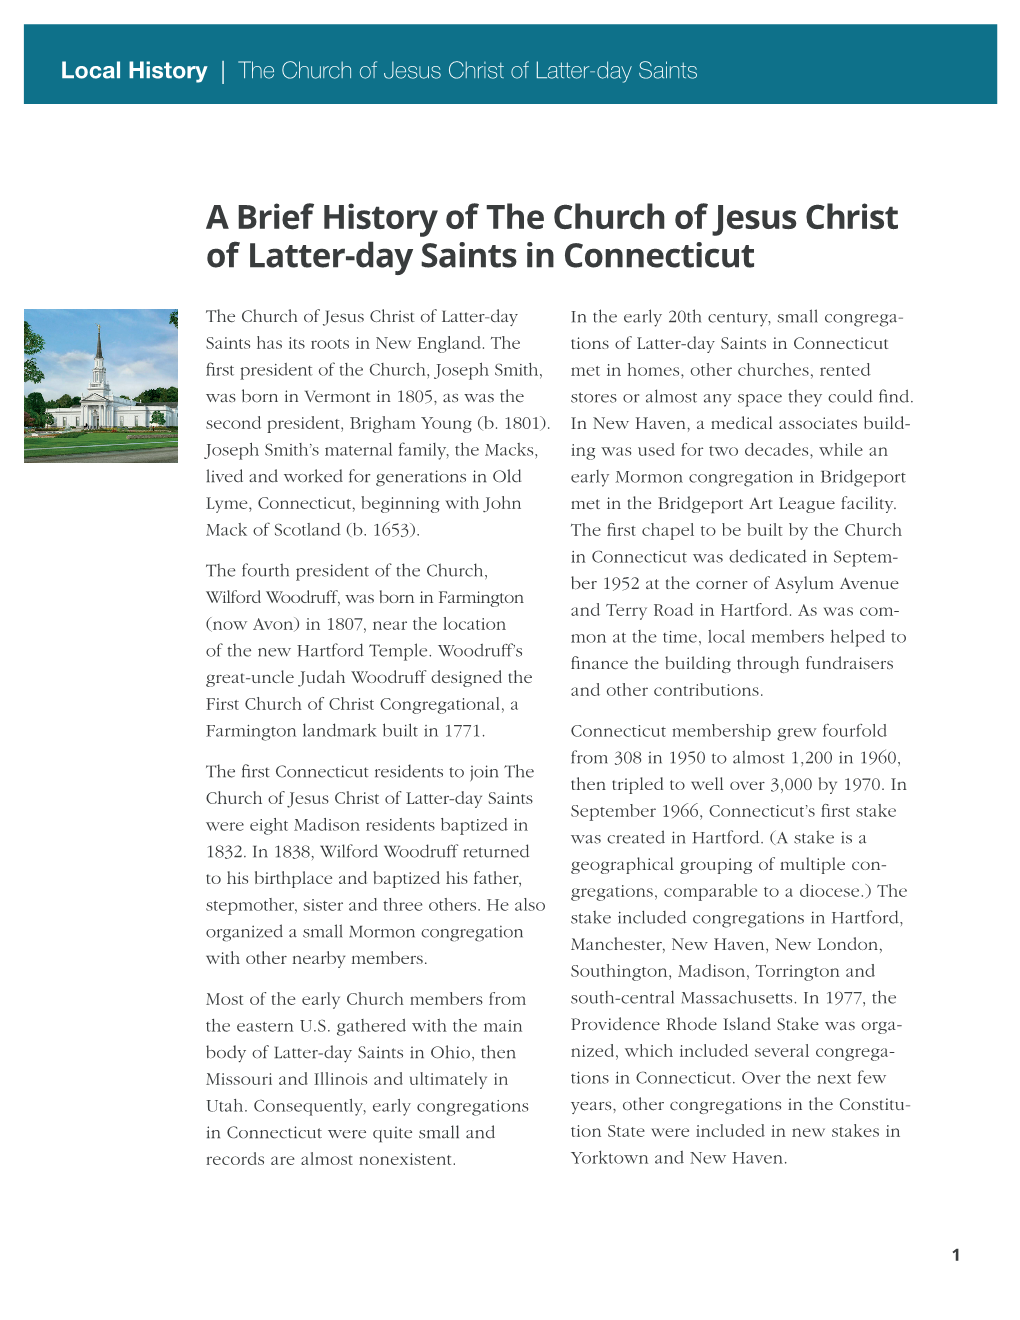 A Brief History of the Church of Jesus Christ of Latter-Day Saints in Connecticut